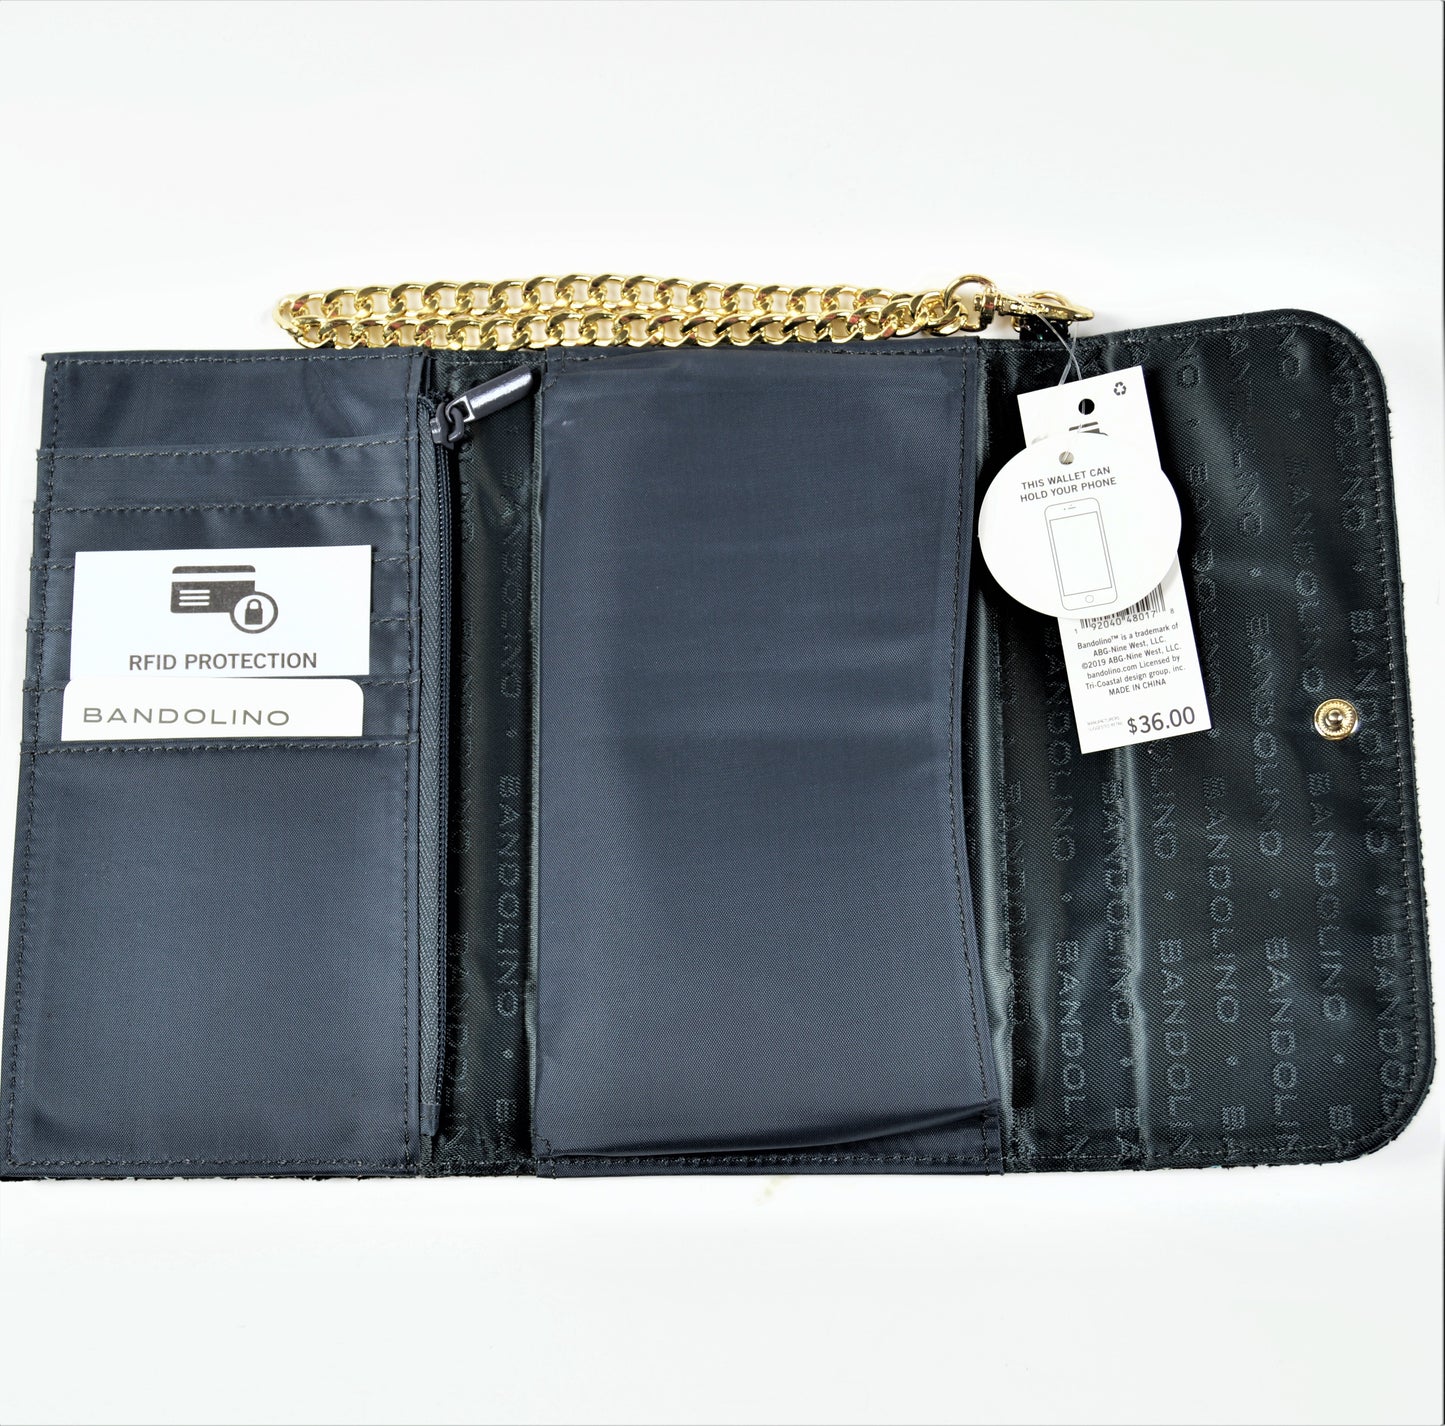 Bandolino RFID Wristlet/Wallet can hold your Phone